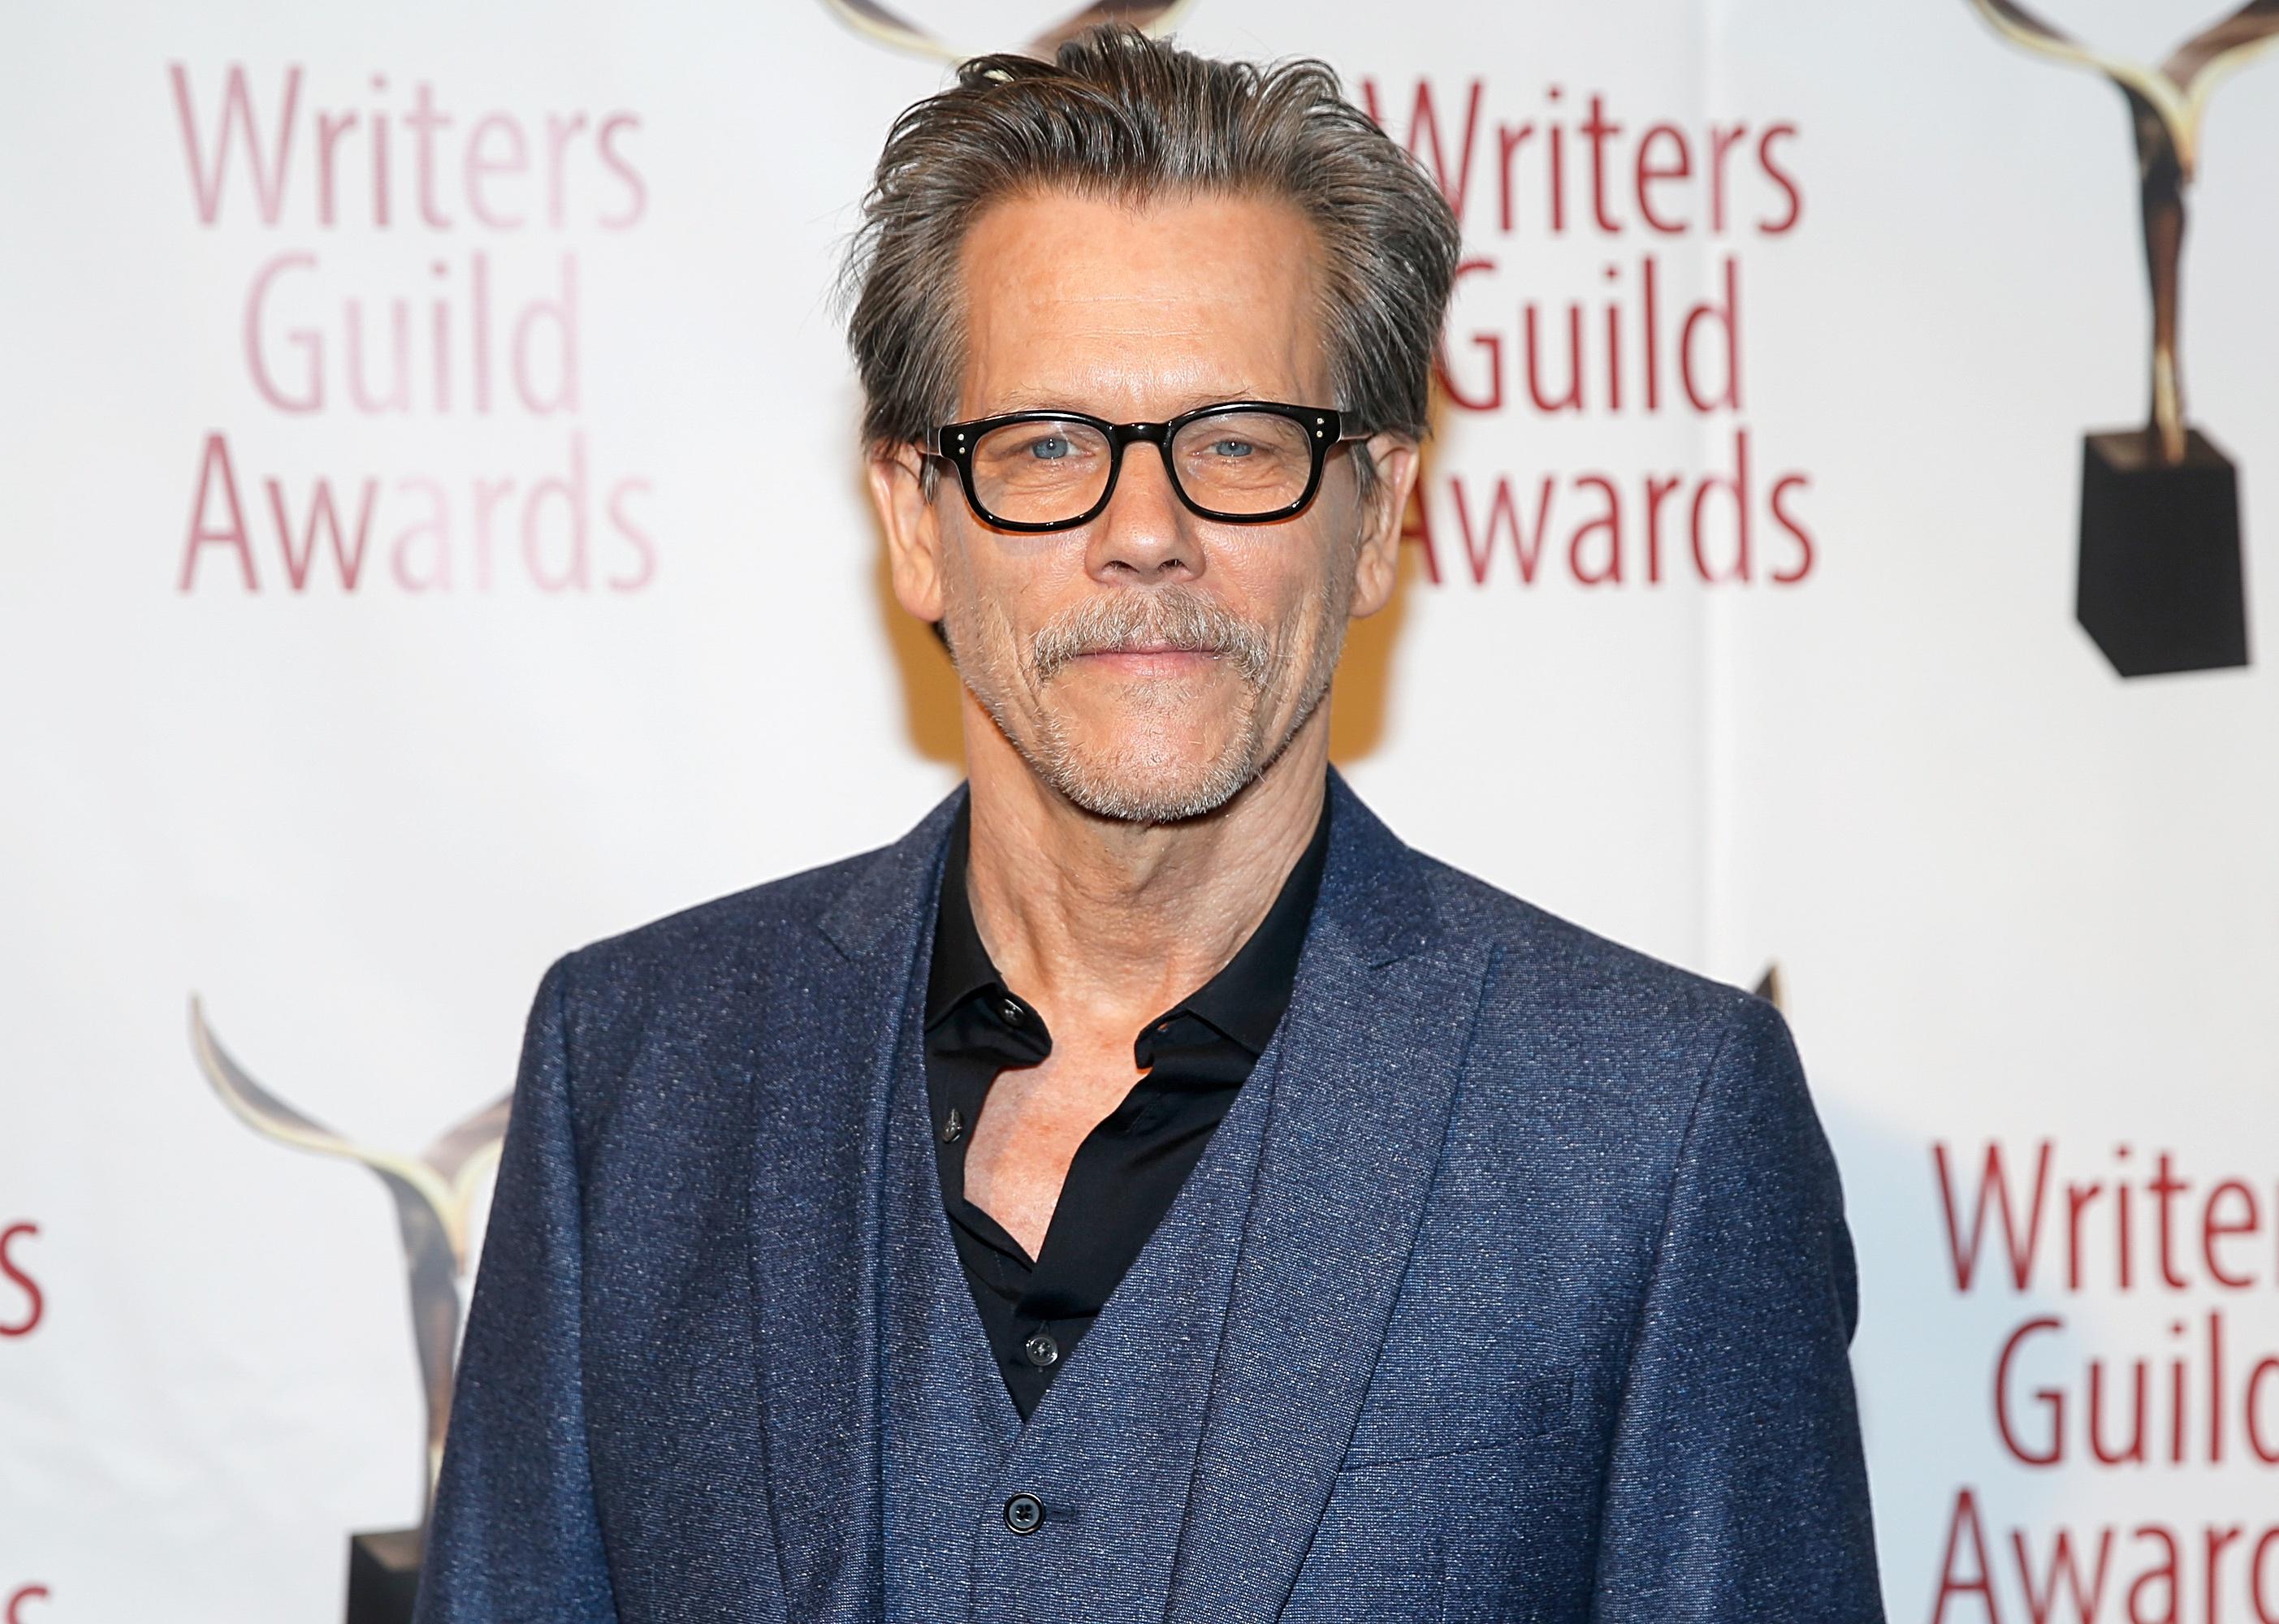 Kevin Bacon attends the 72nd Writers Guild Awards.